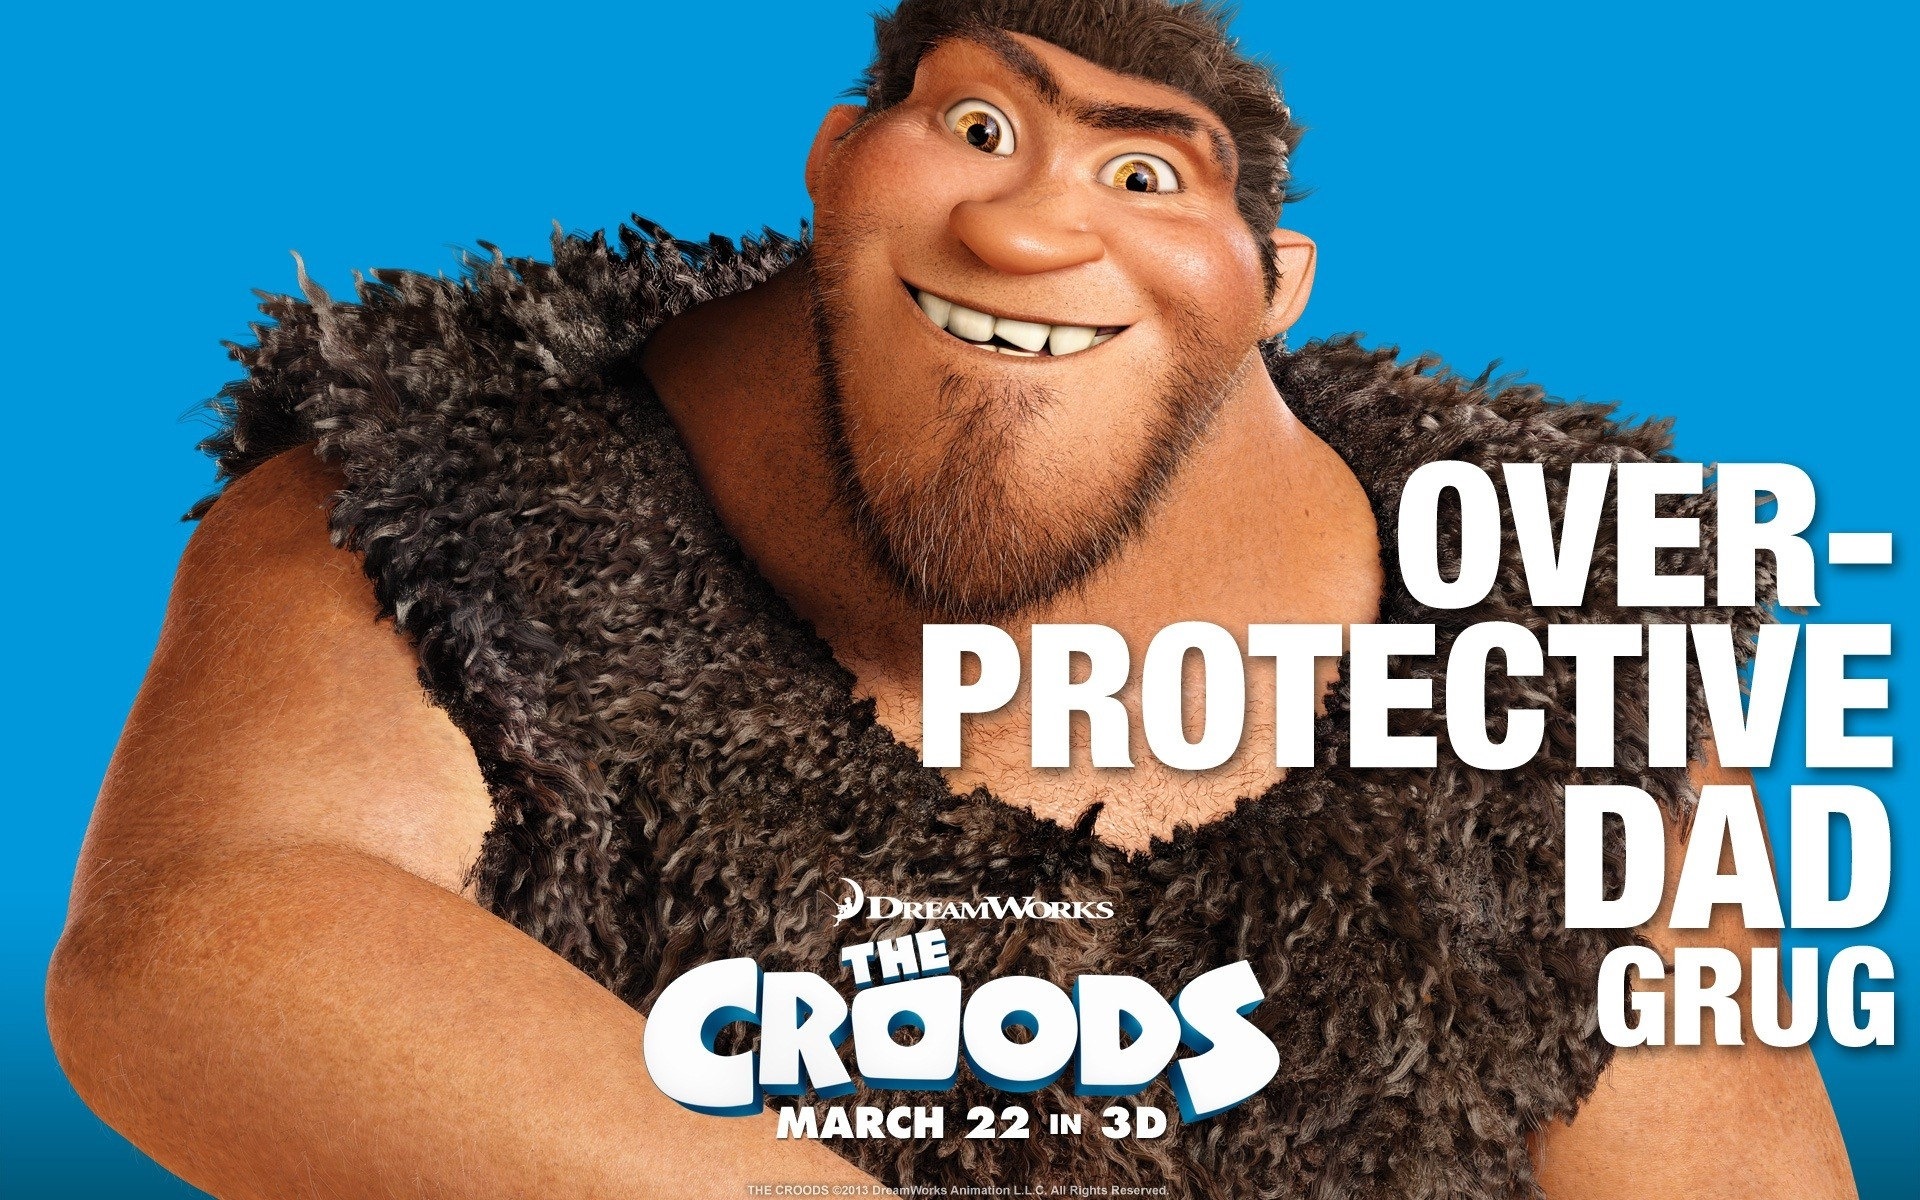 V Croods HD Movie Wallpapers #11 - 1920x1200